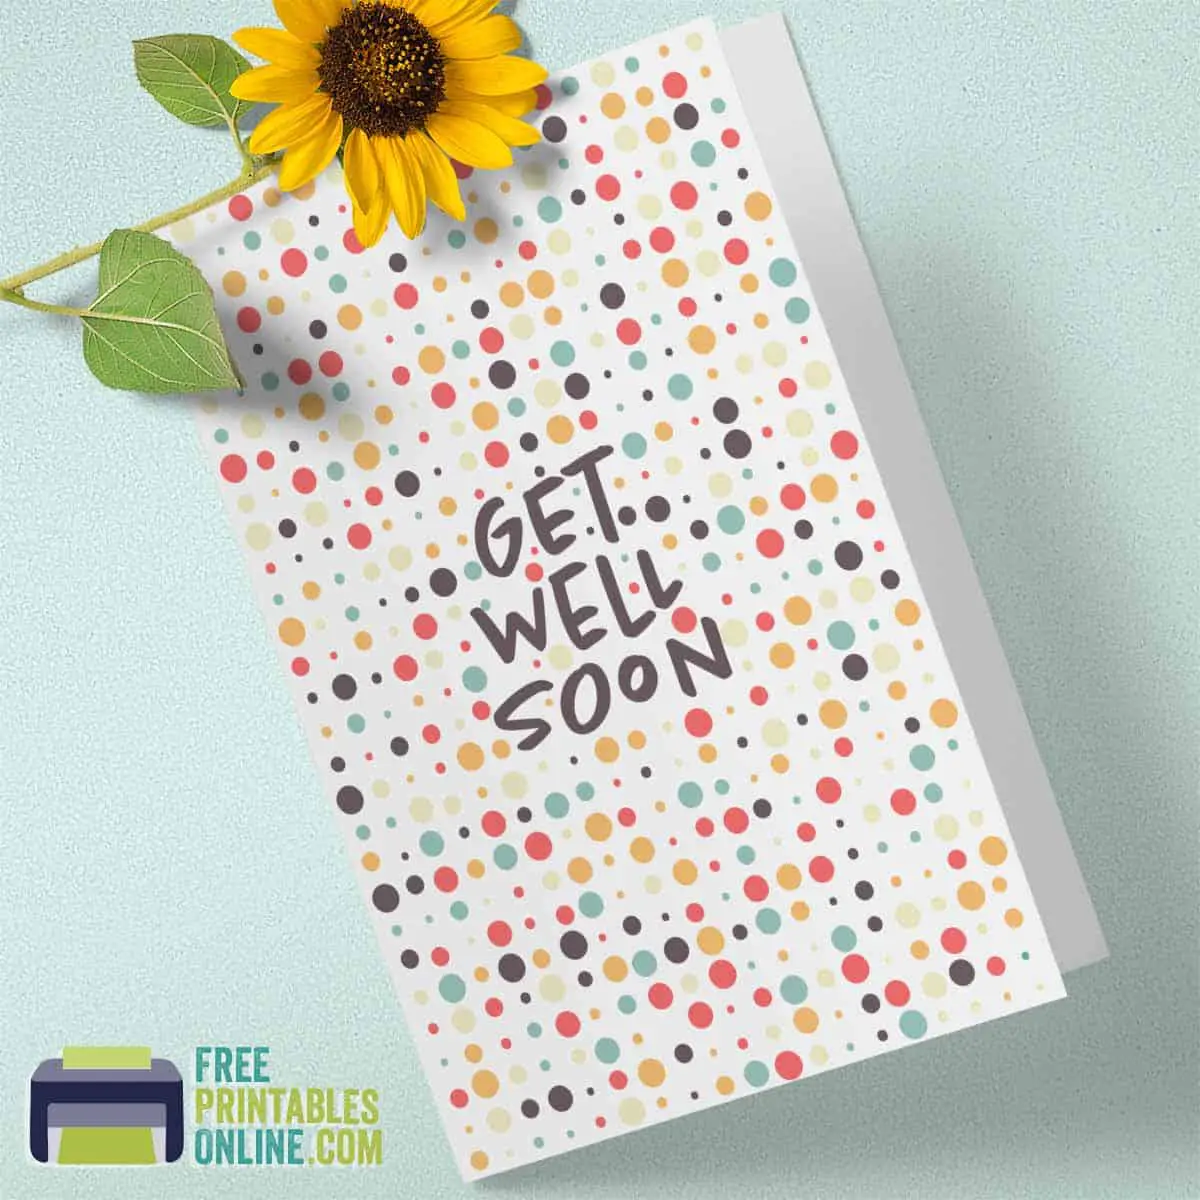 Get Well Soon Card Template